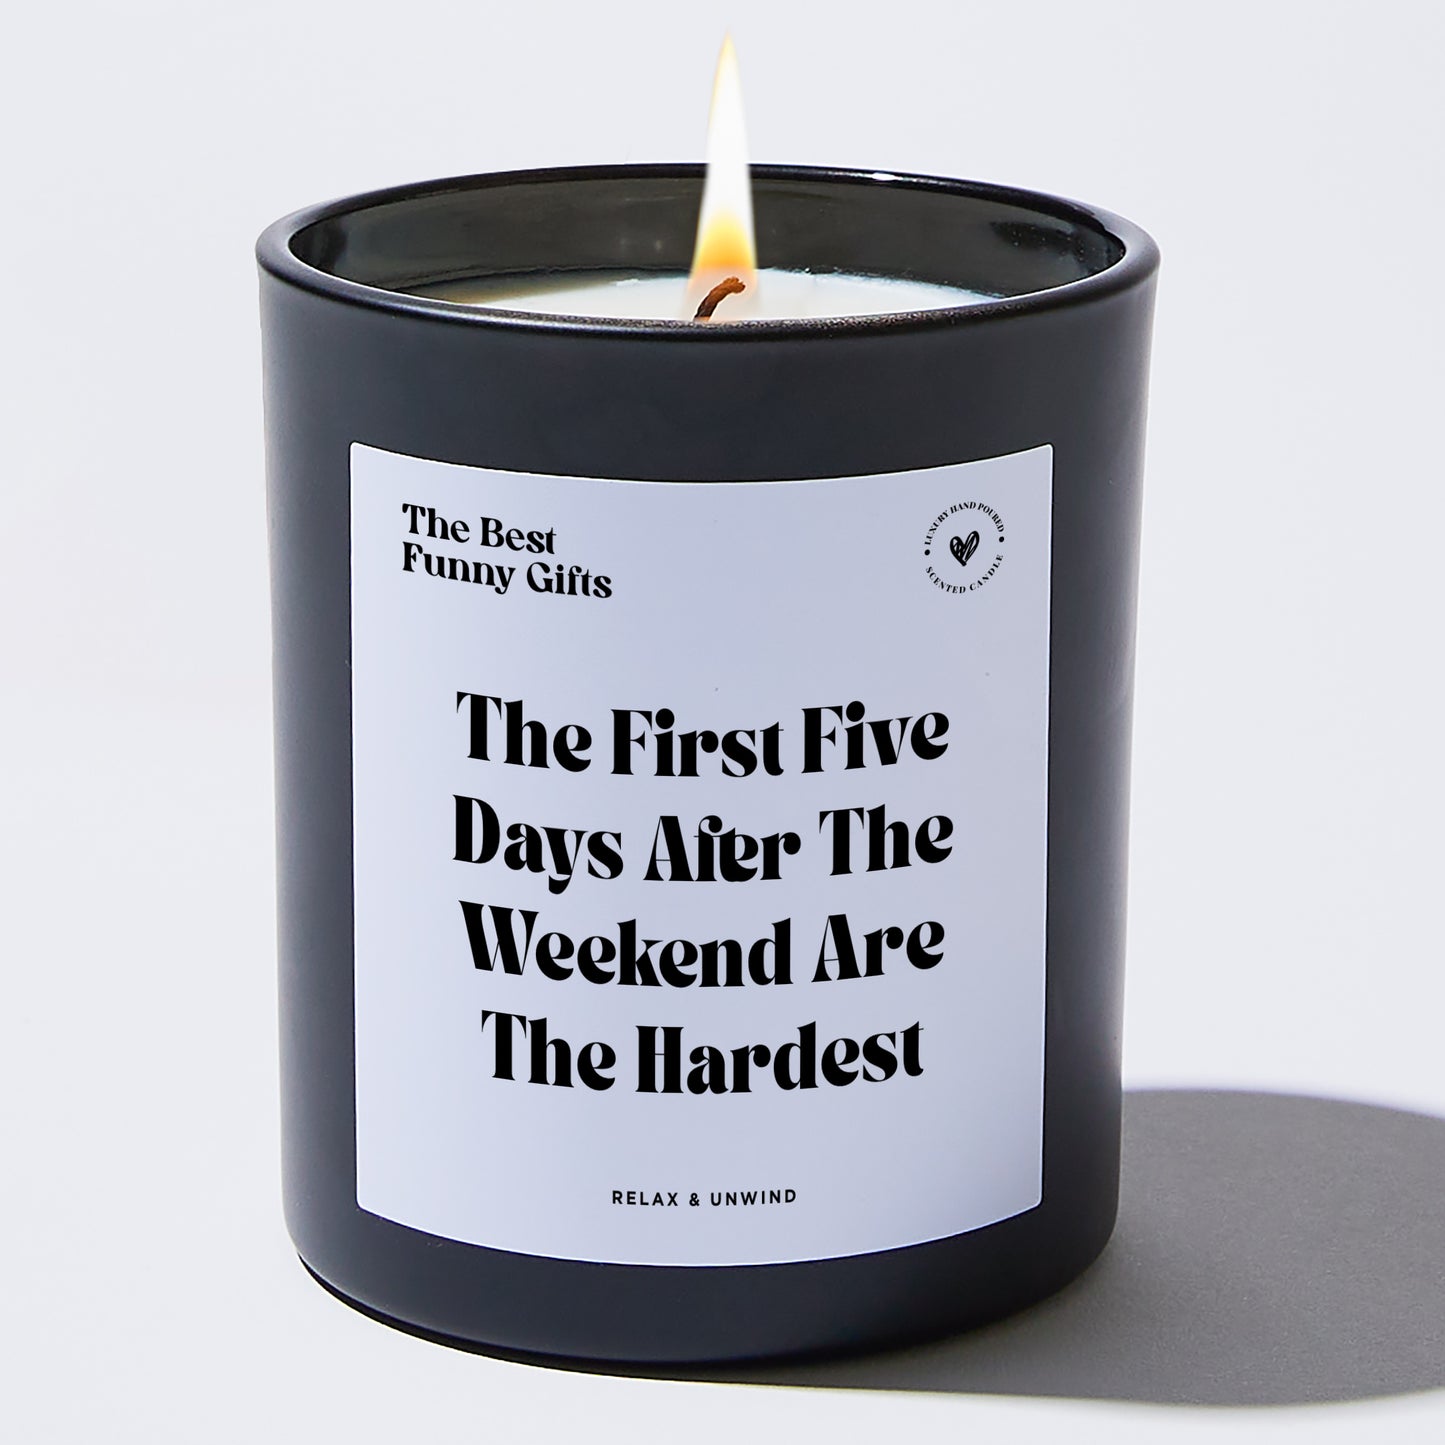 Funny Candle The First Five Days After The Weekend Are The Hardest - The Best Funny Gifts